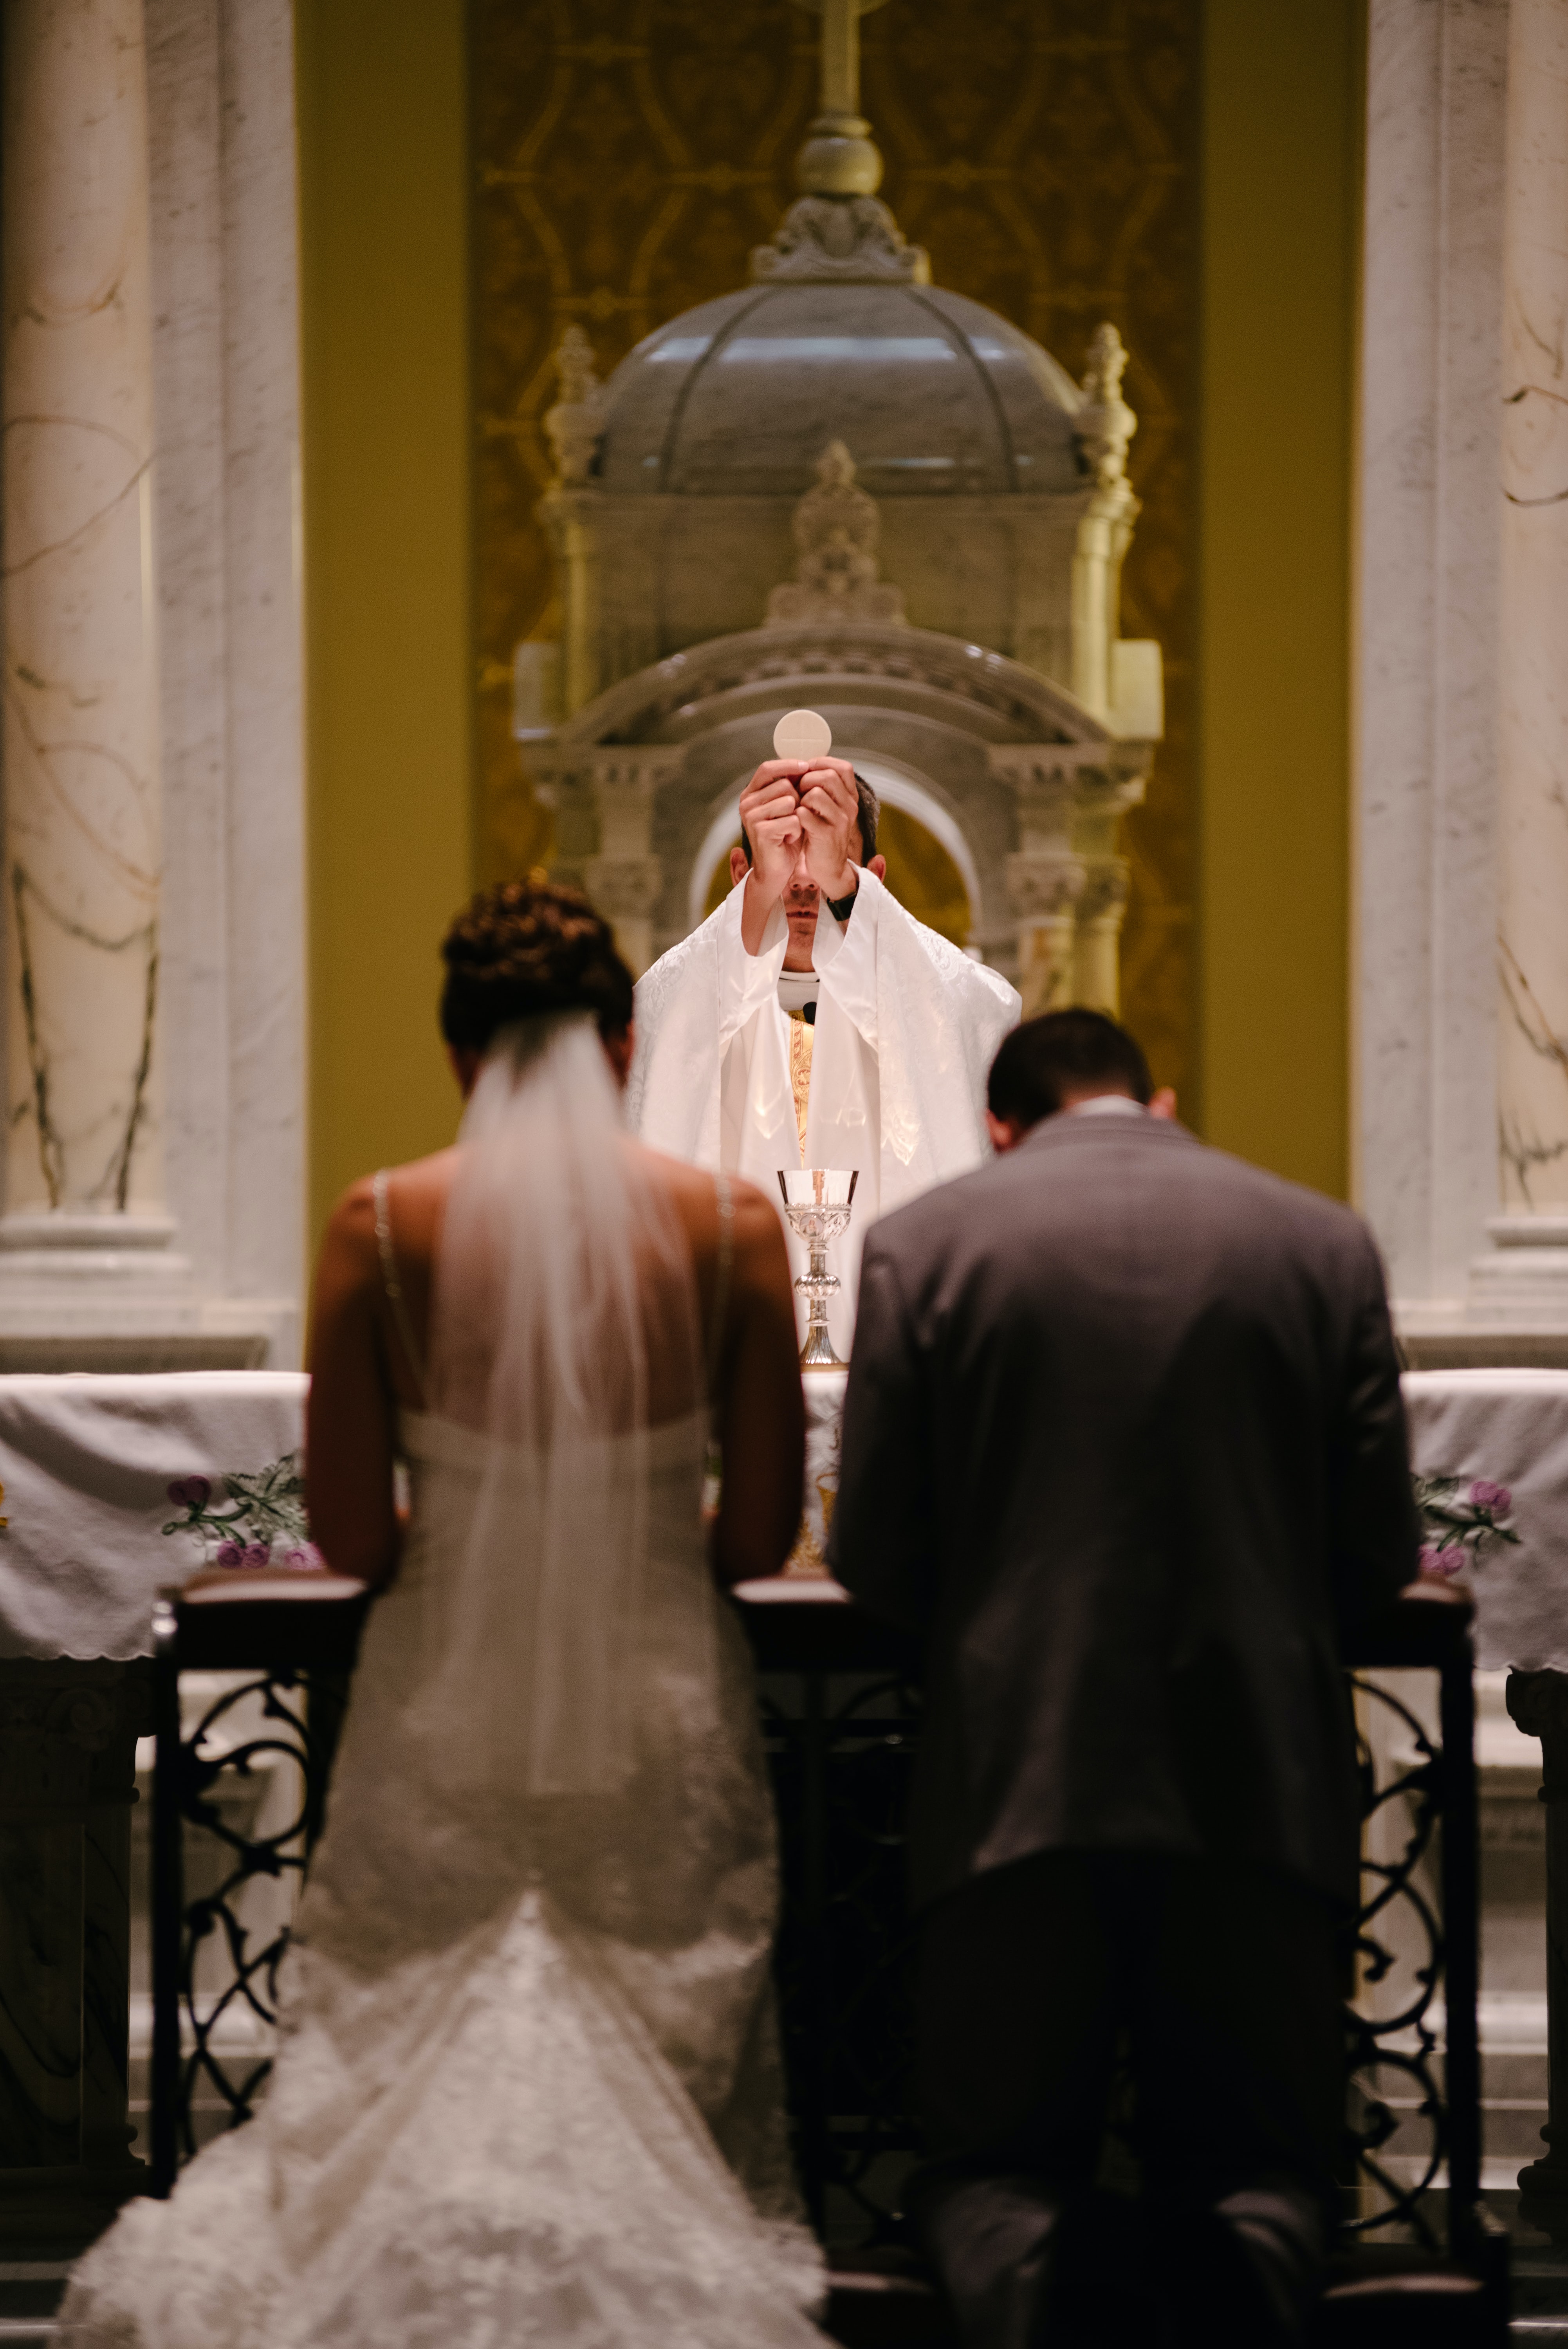 Bride and groom kneeling in front of altar with Priest holding up the Eucharist